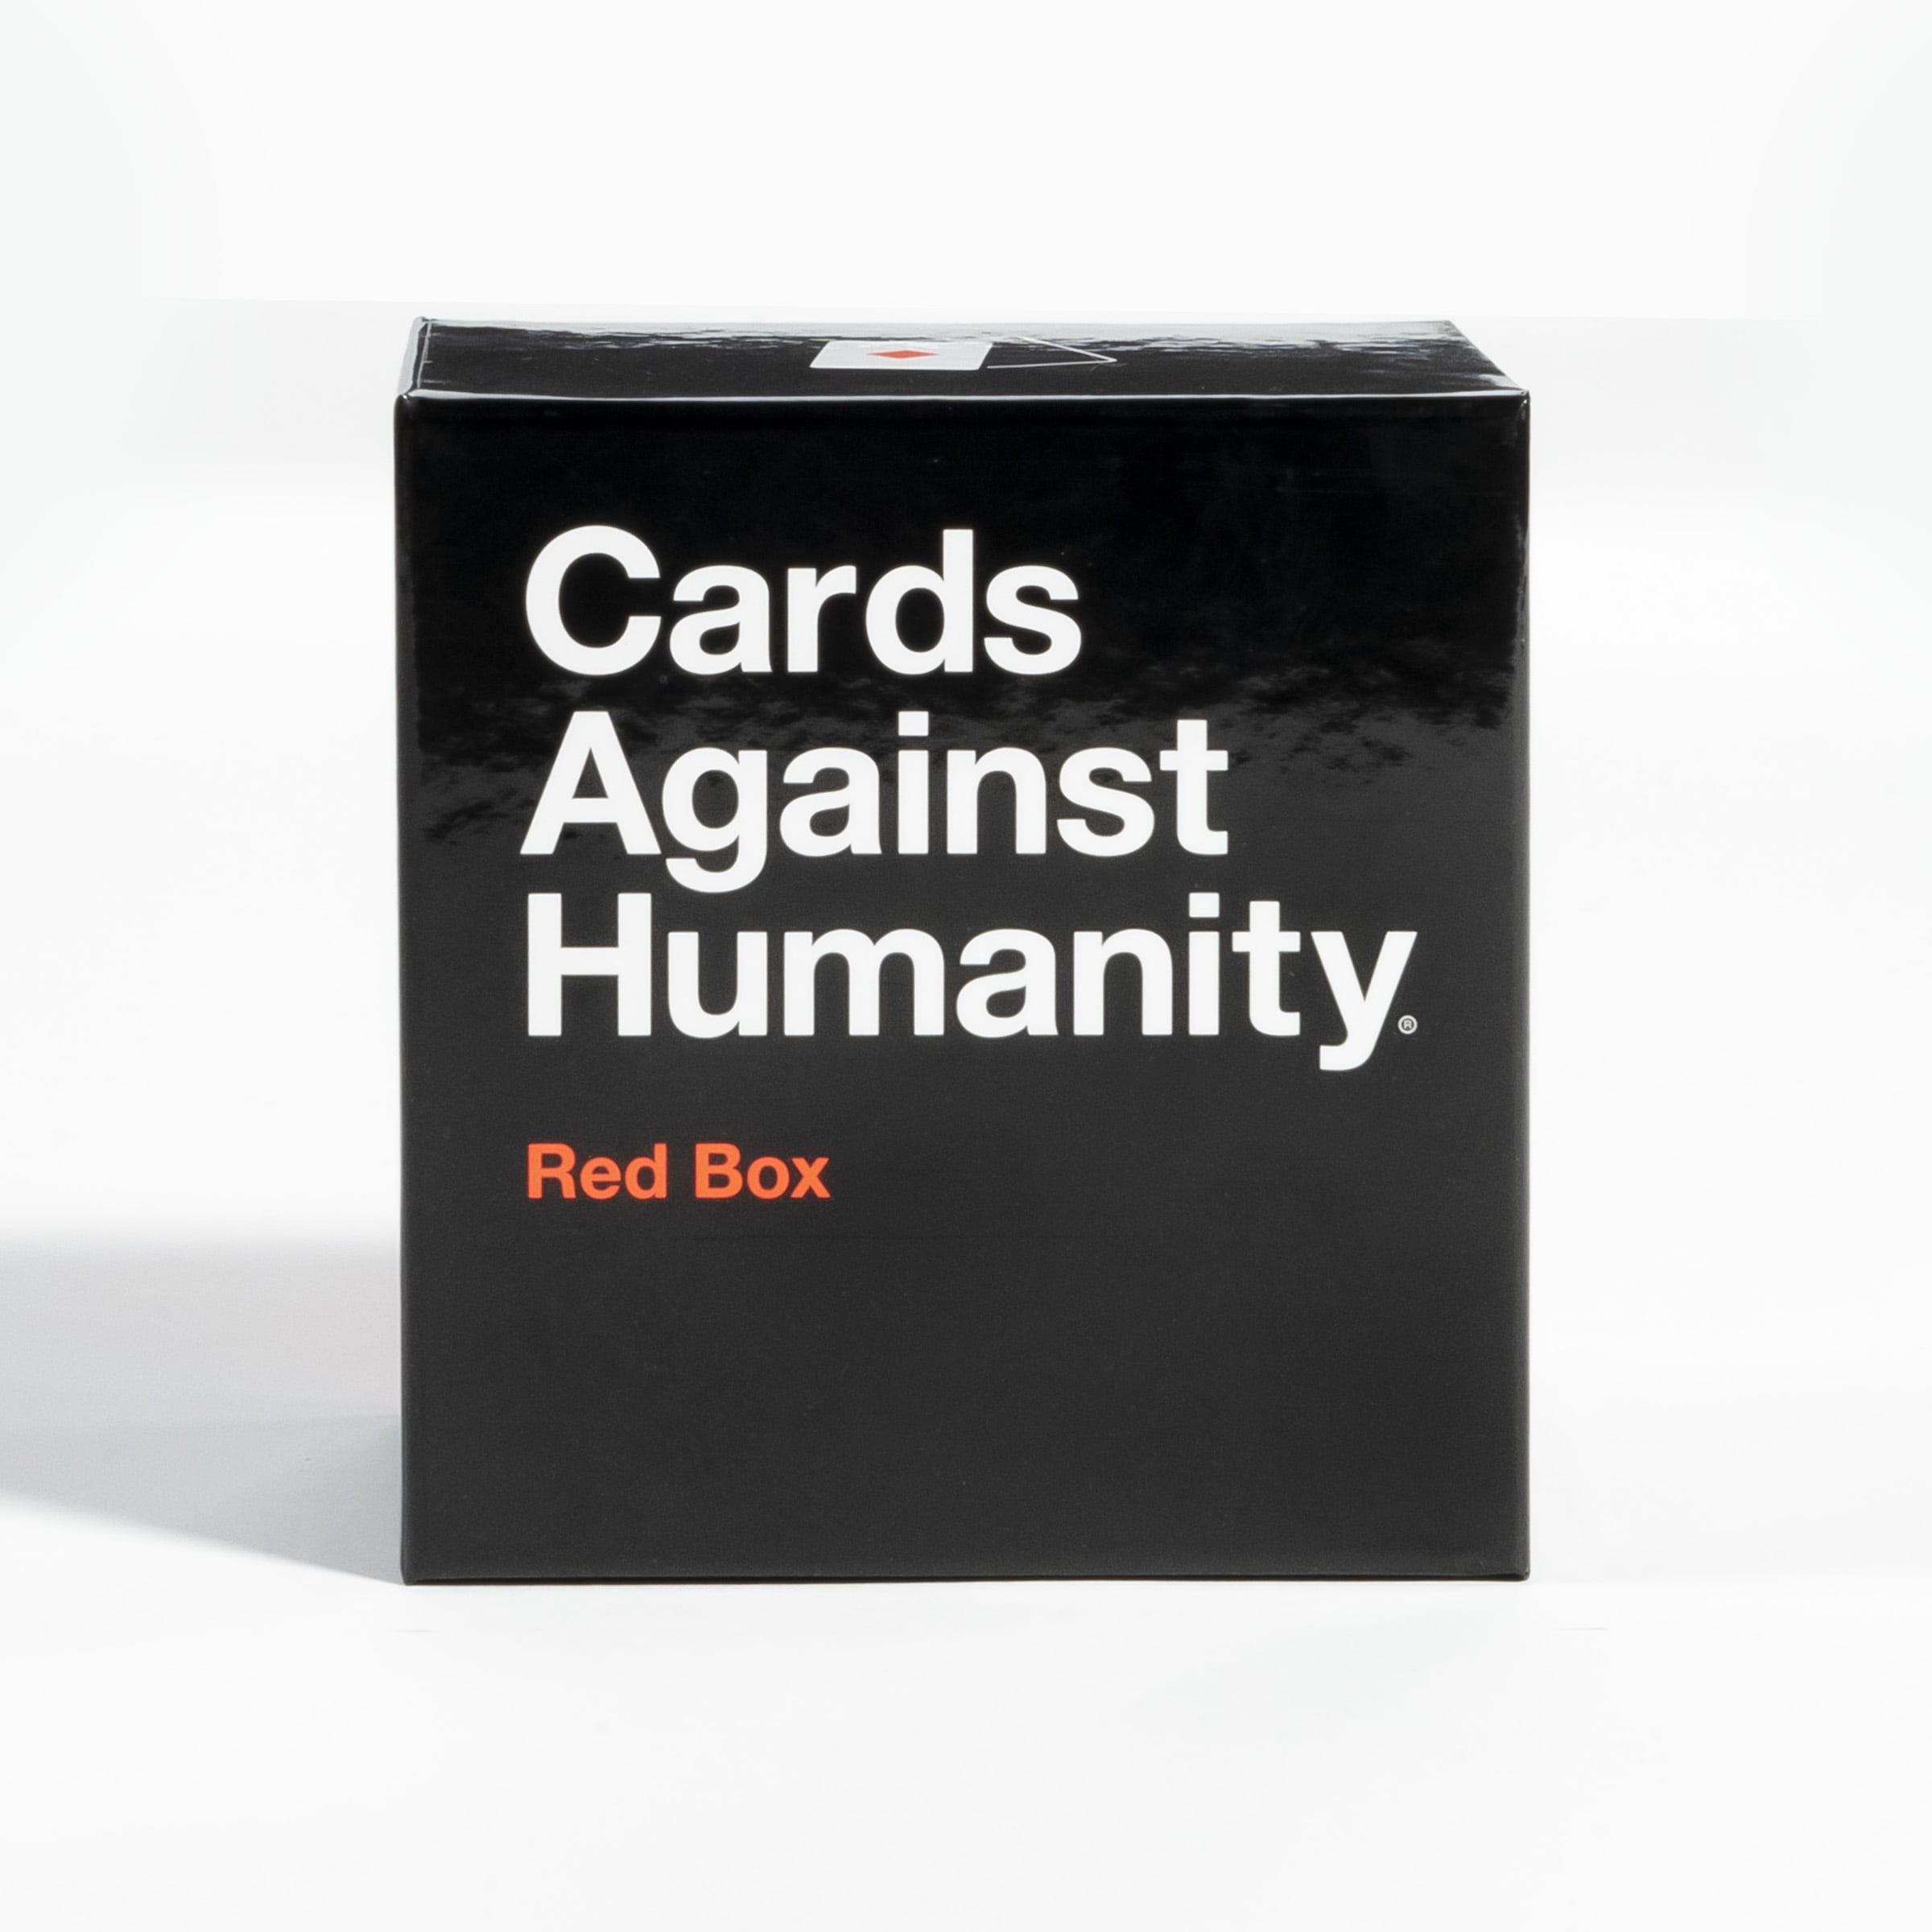 Cards Against Humanity CARDS AGAINST HUMANITY Red Box EXPANSION DECK Card Game 